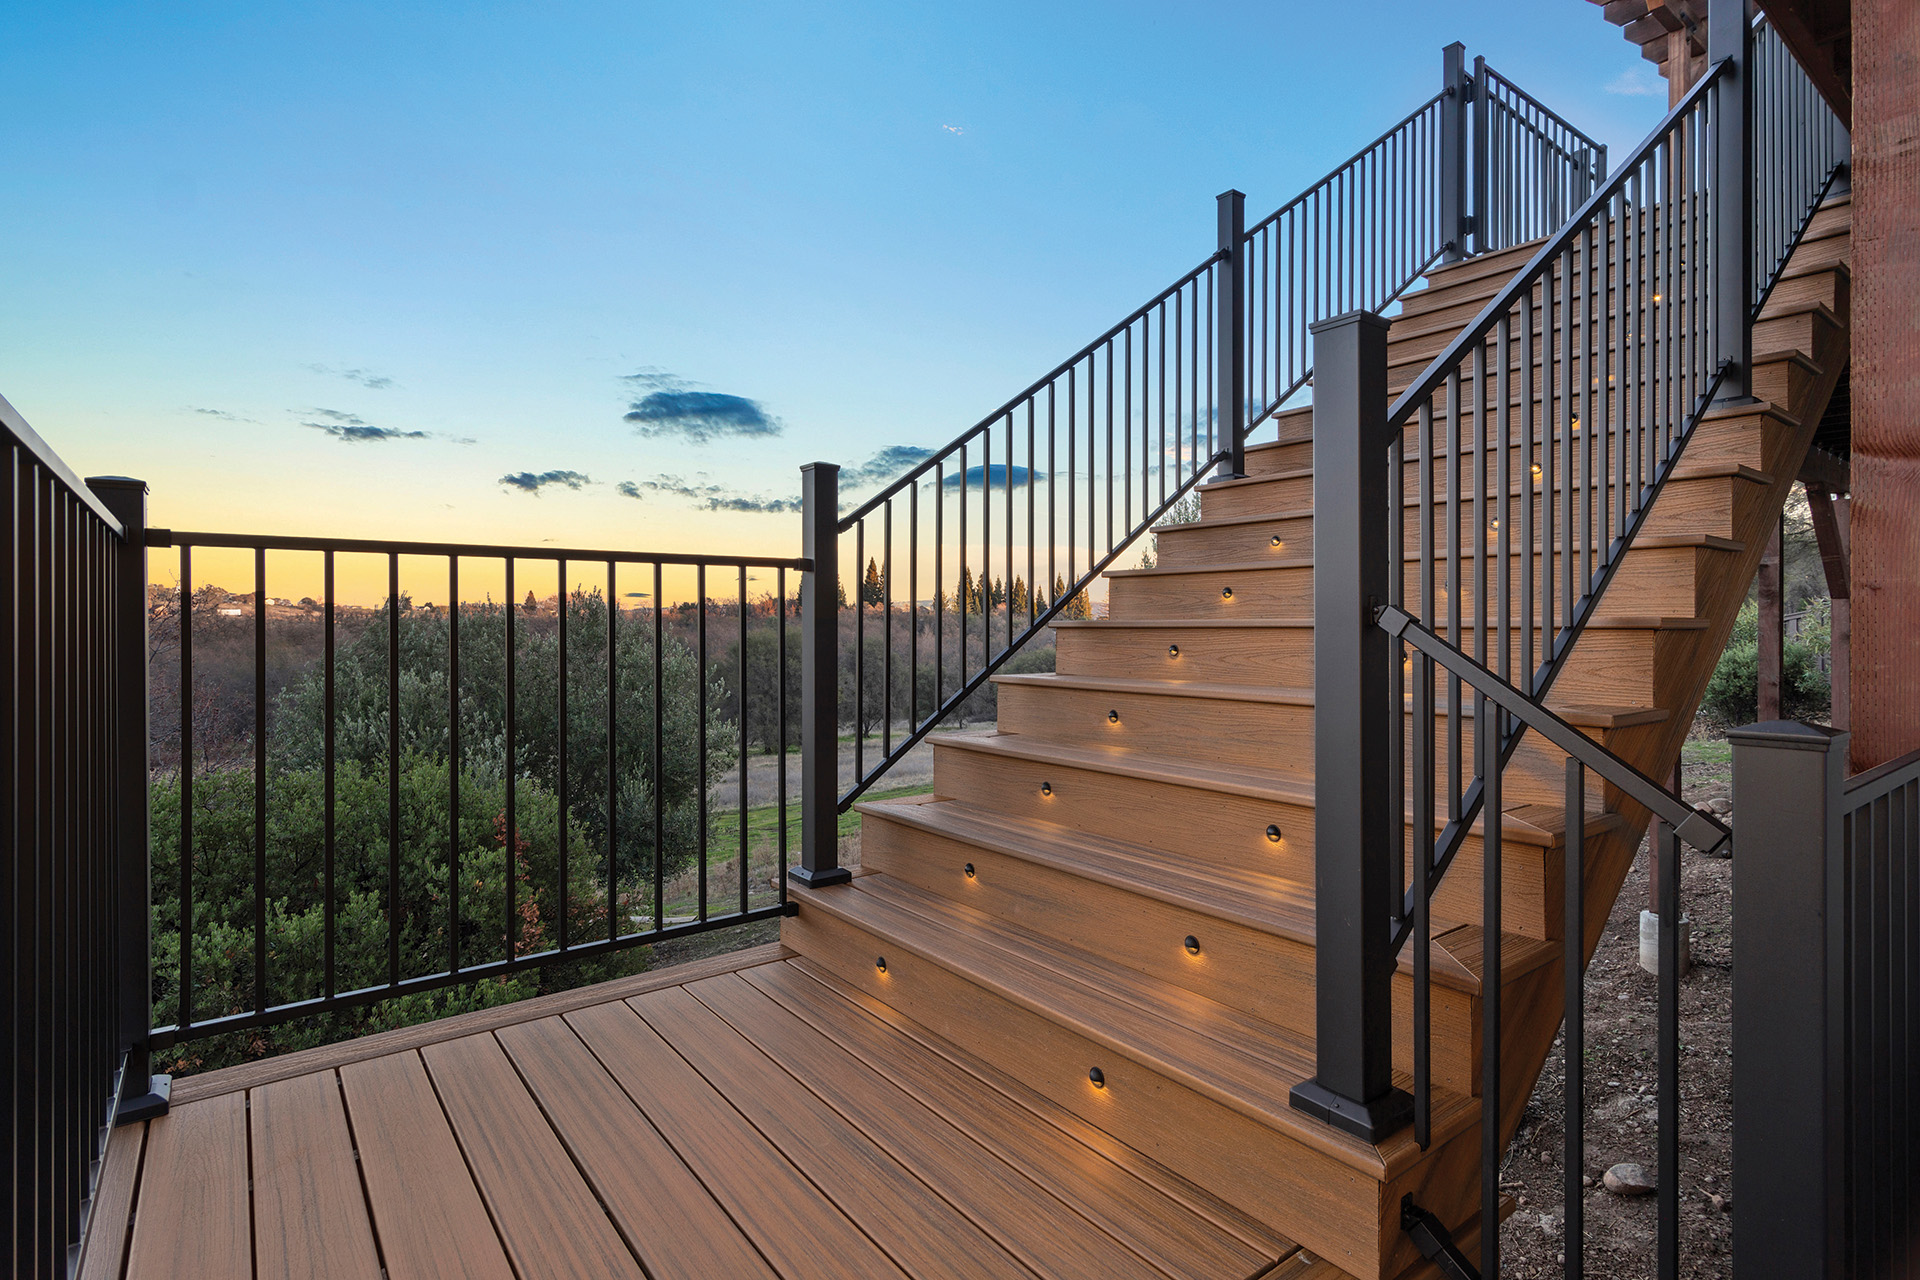 Composite deck stairs with steel railing connect a multilevel deck